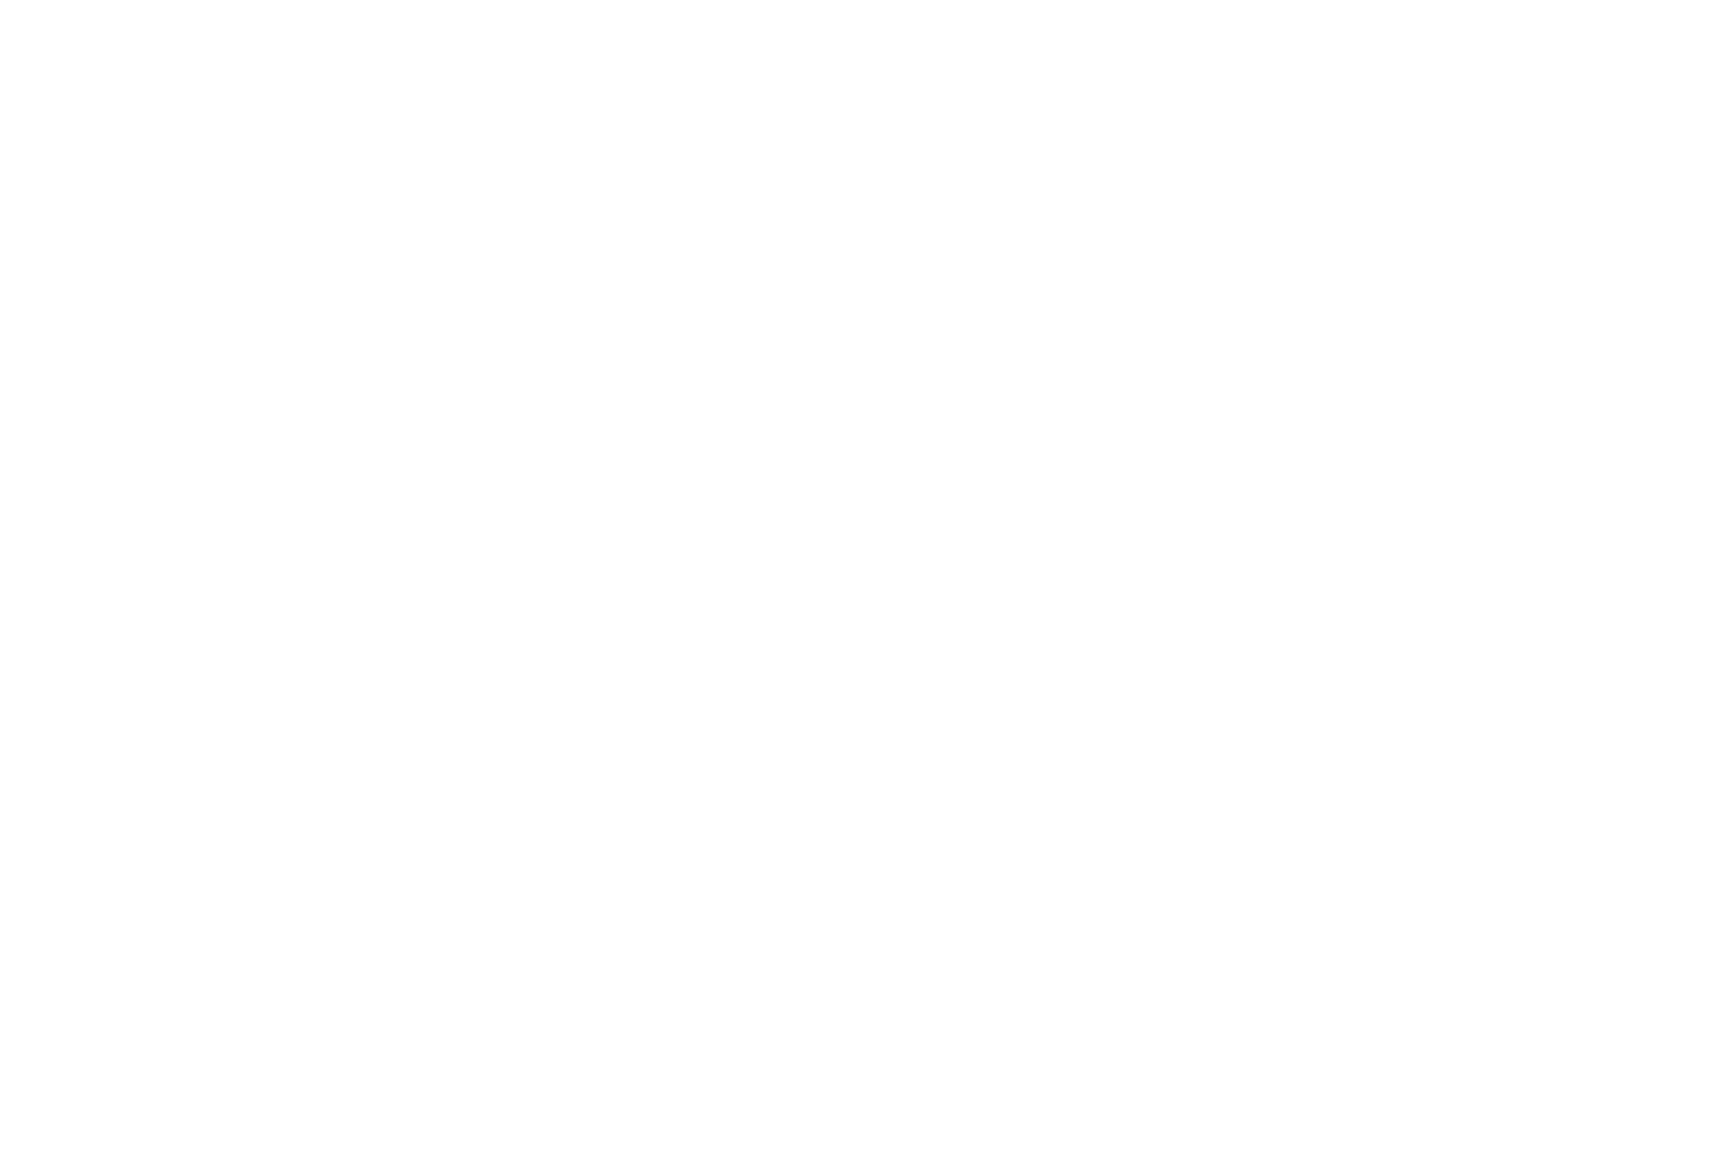 OFFICIAL SELECTION - NEW FILMMAKERS NEW YORK  - 2016.png